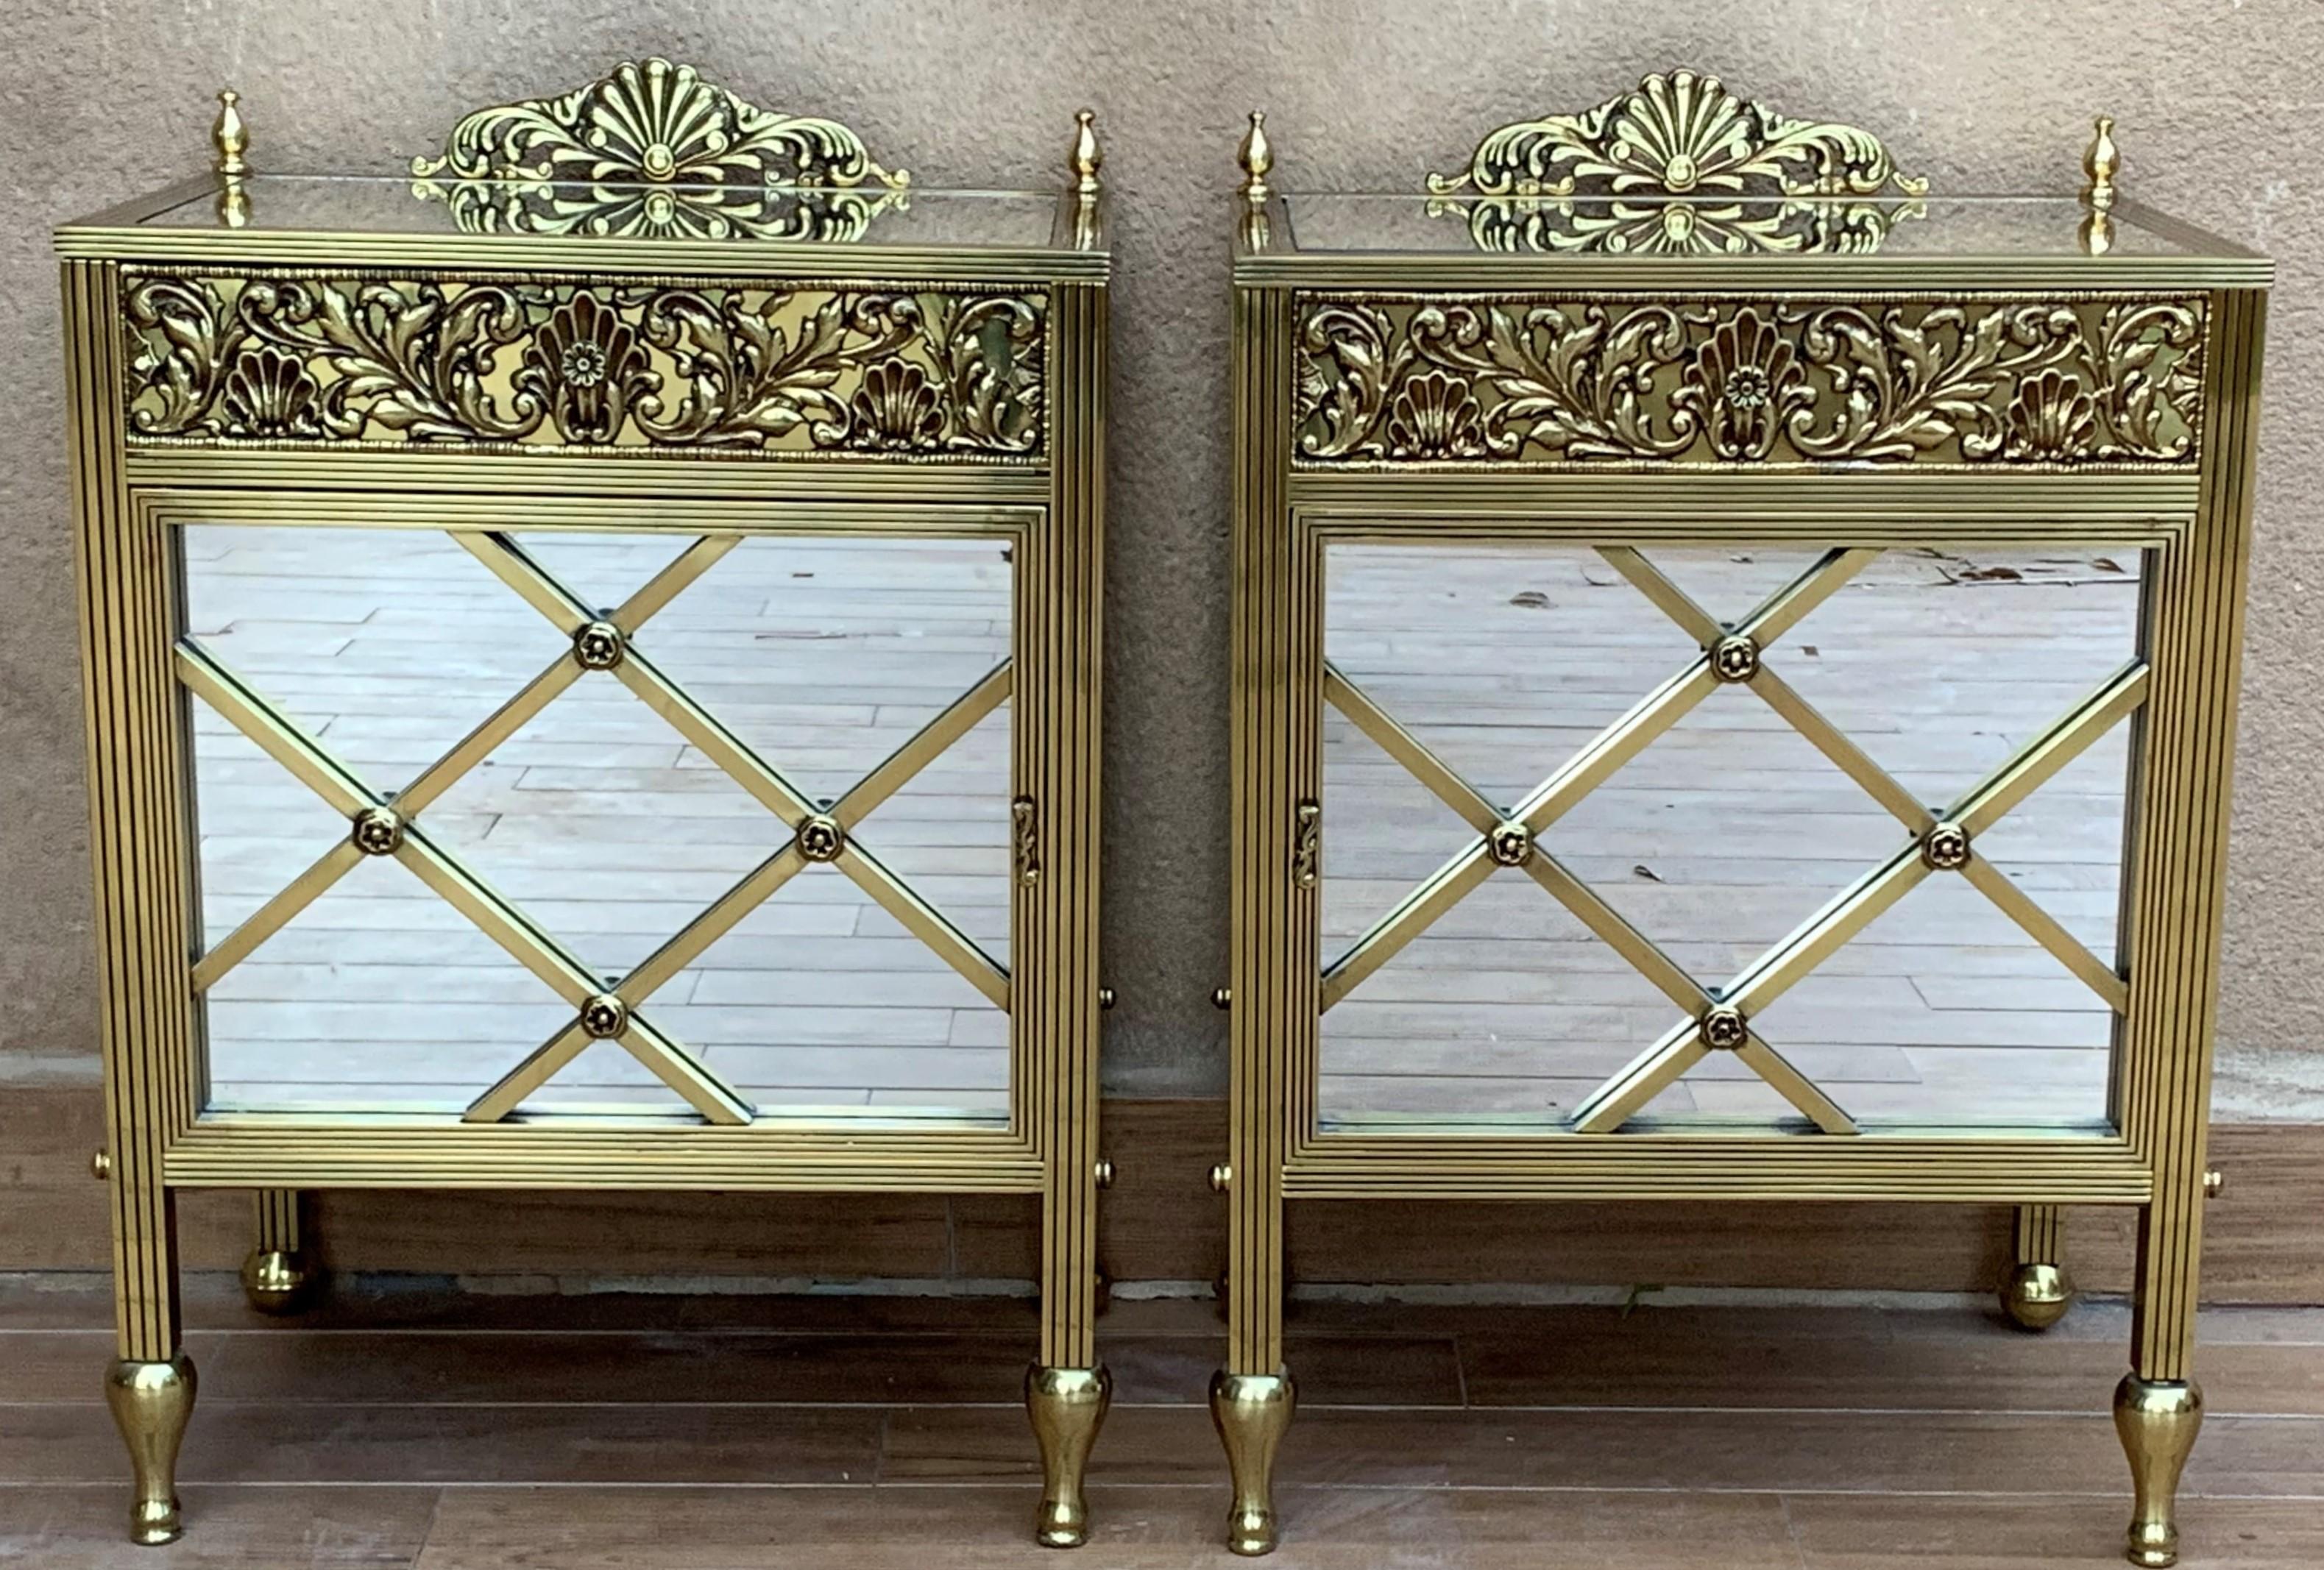 20th century pair of bronze nightstands with mirrored doors and drawers.

This early antique Louis XVI style bronze or glass vitrine cabinet or nightstand is simply stunning and constructed of the finest quality. The bronze mounts of fine form